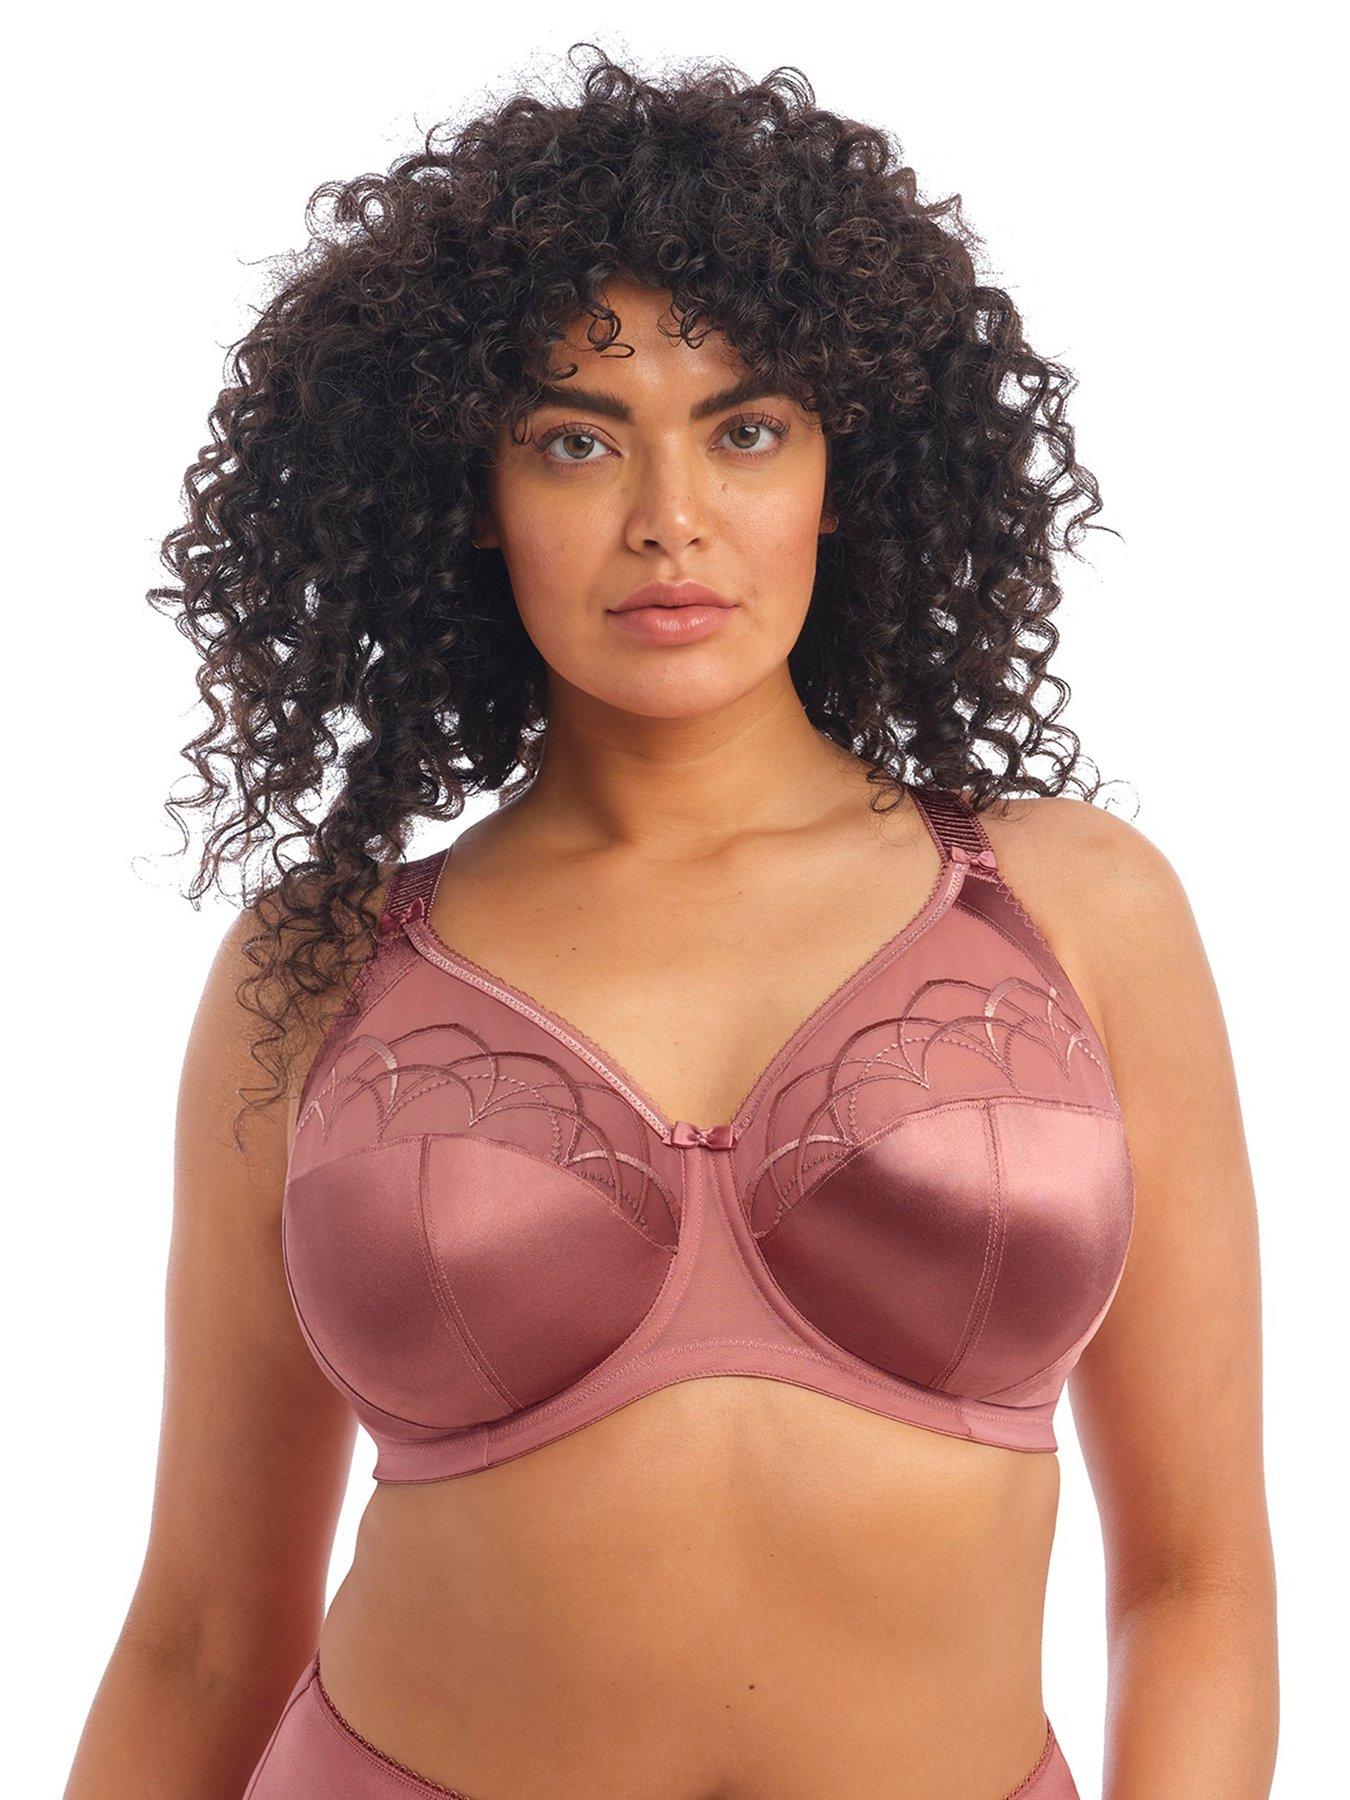 50% OFF Semi-Annual Sale, Get a stunning lift with this intricately  beautiful bra 🌹